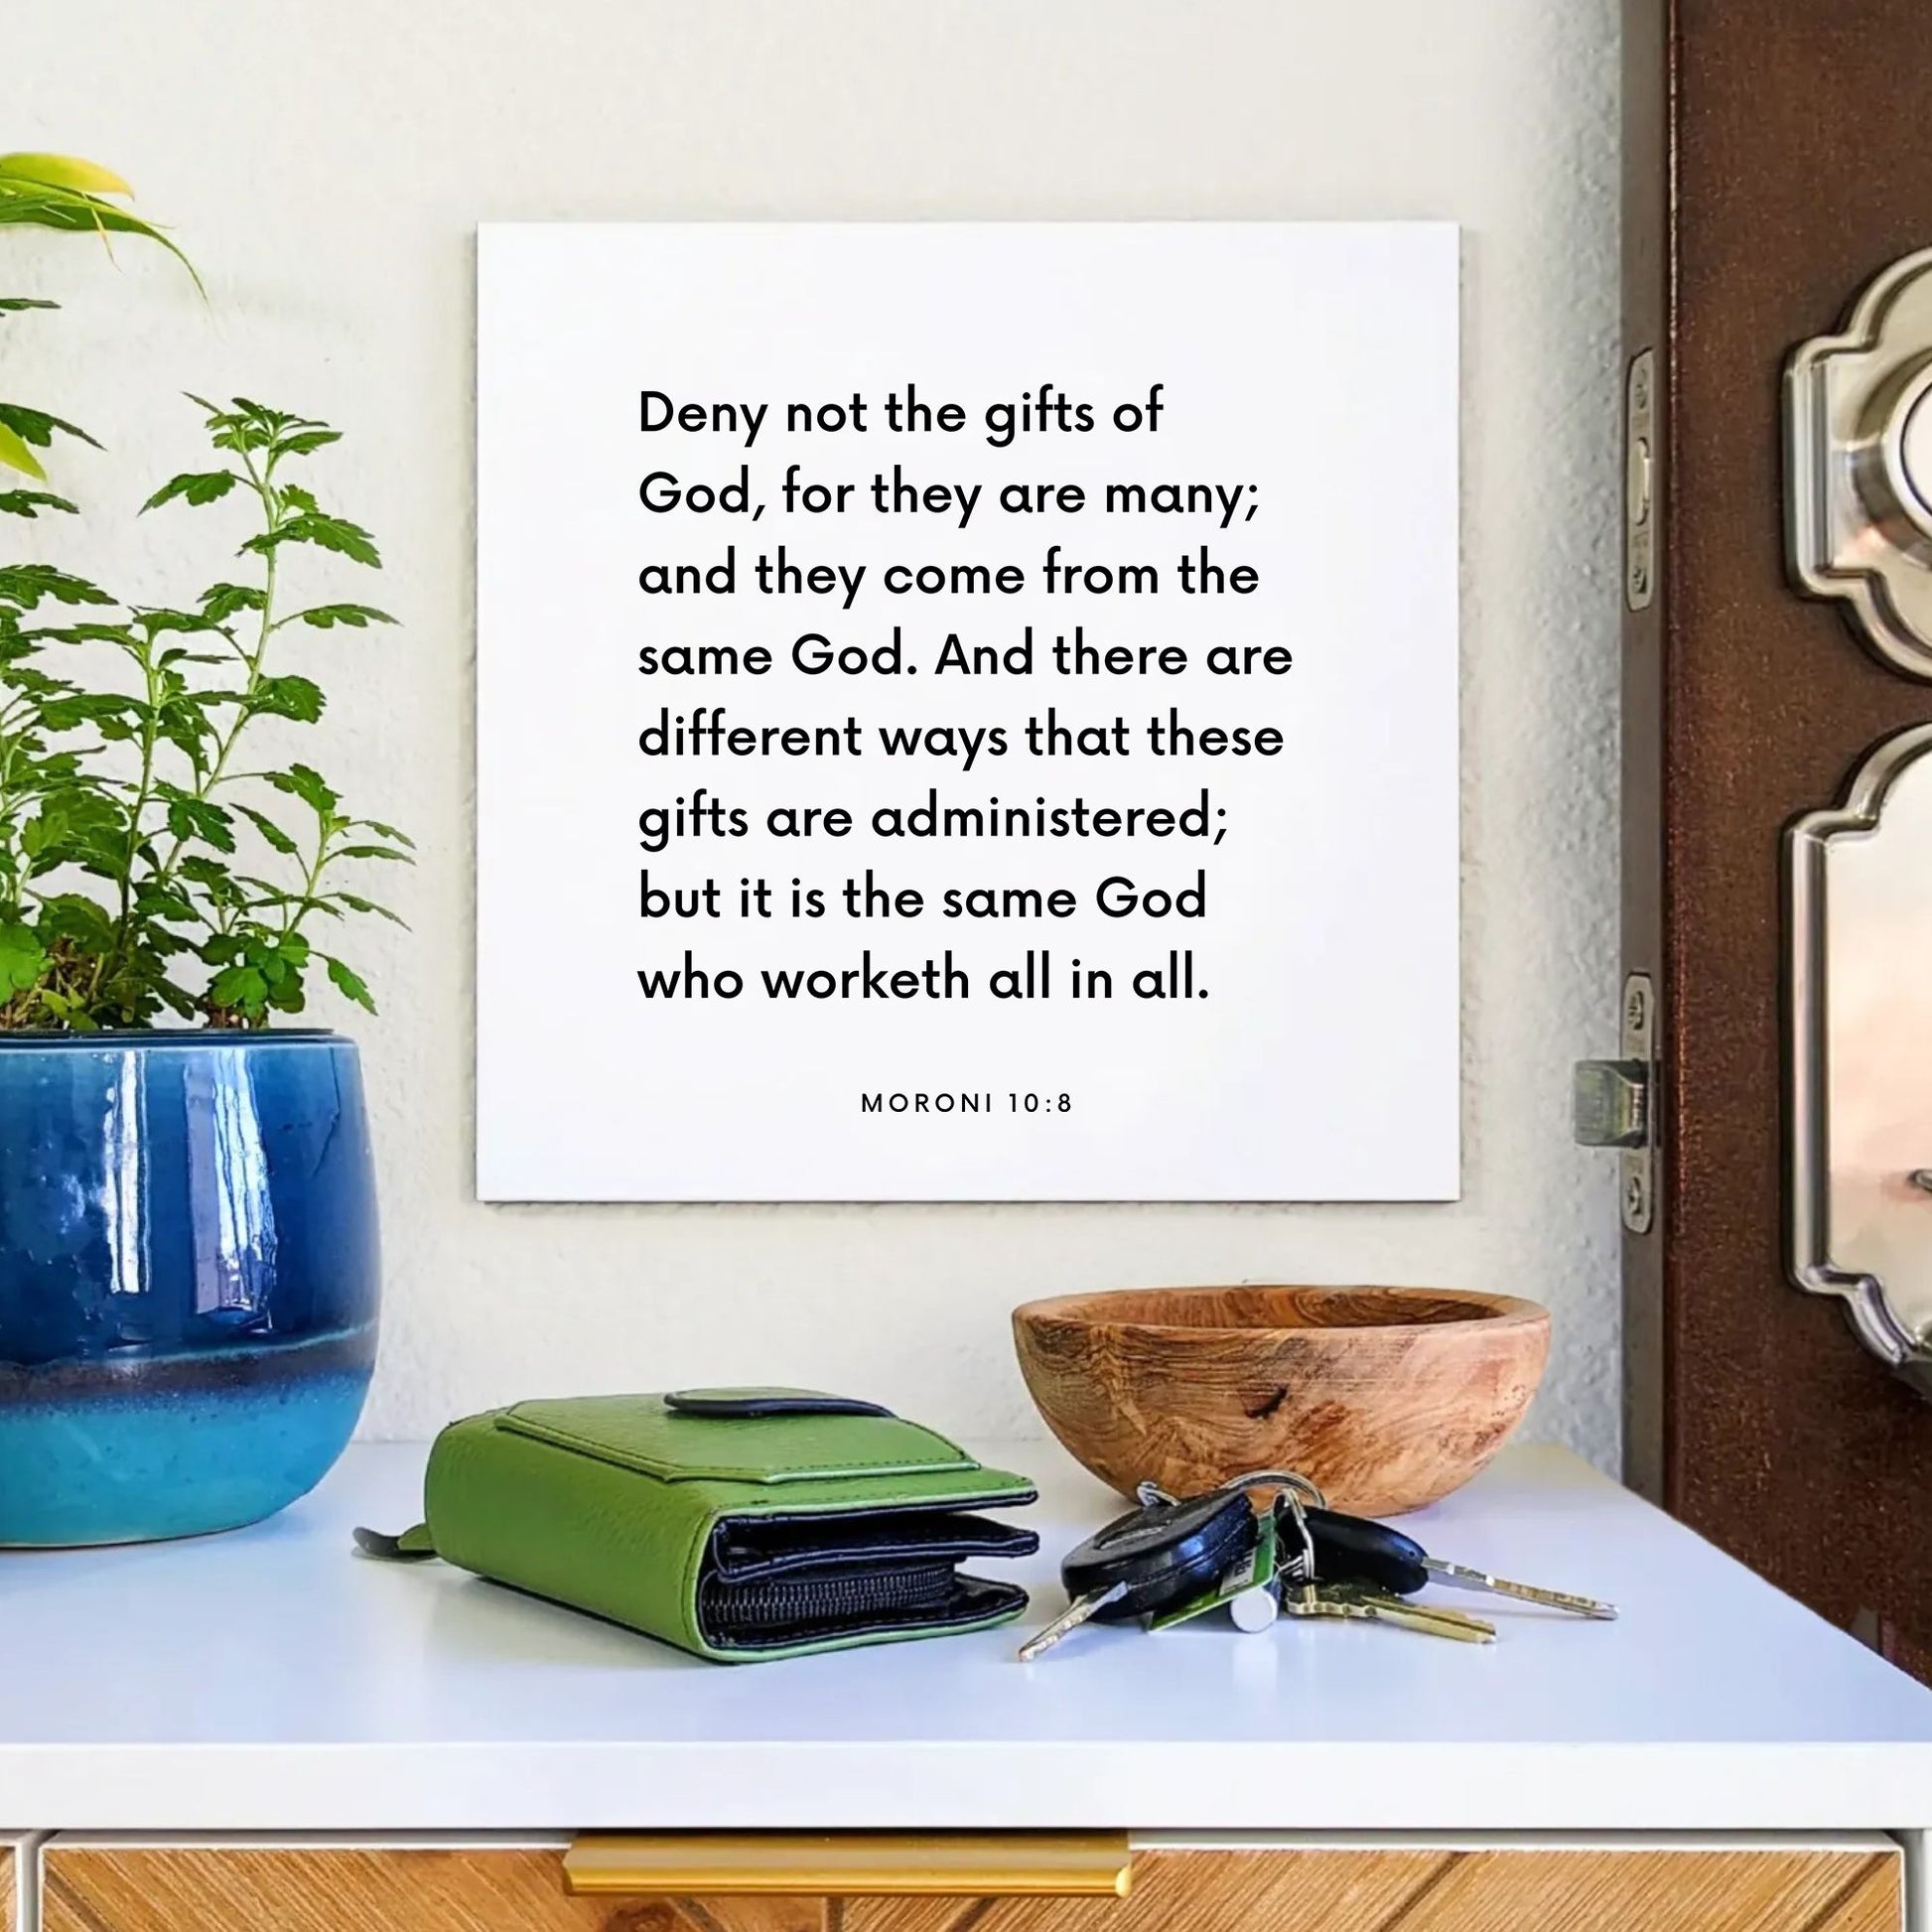 Entryway mouting of the scripture tile for Moroni 10:8 - "Deny not the gifts of God, for they are many"